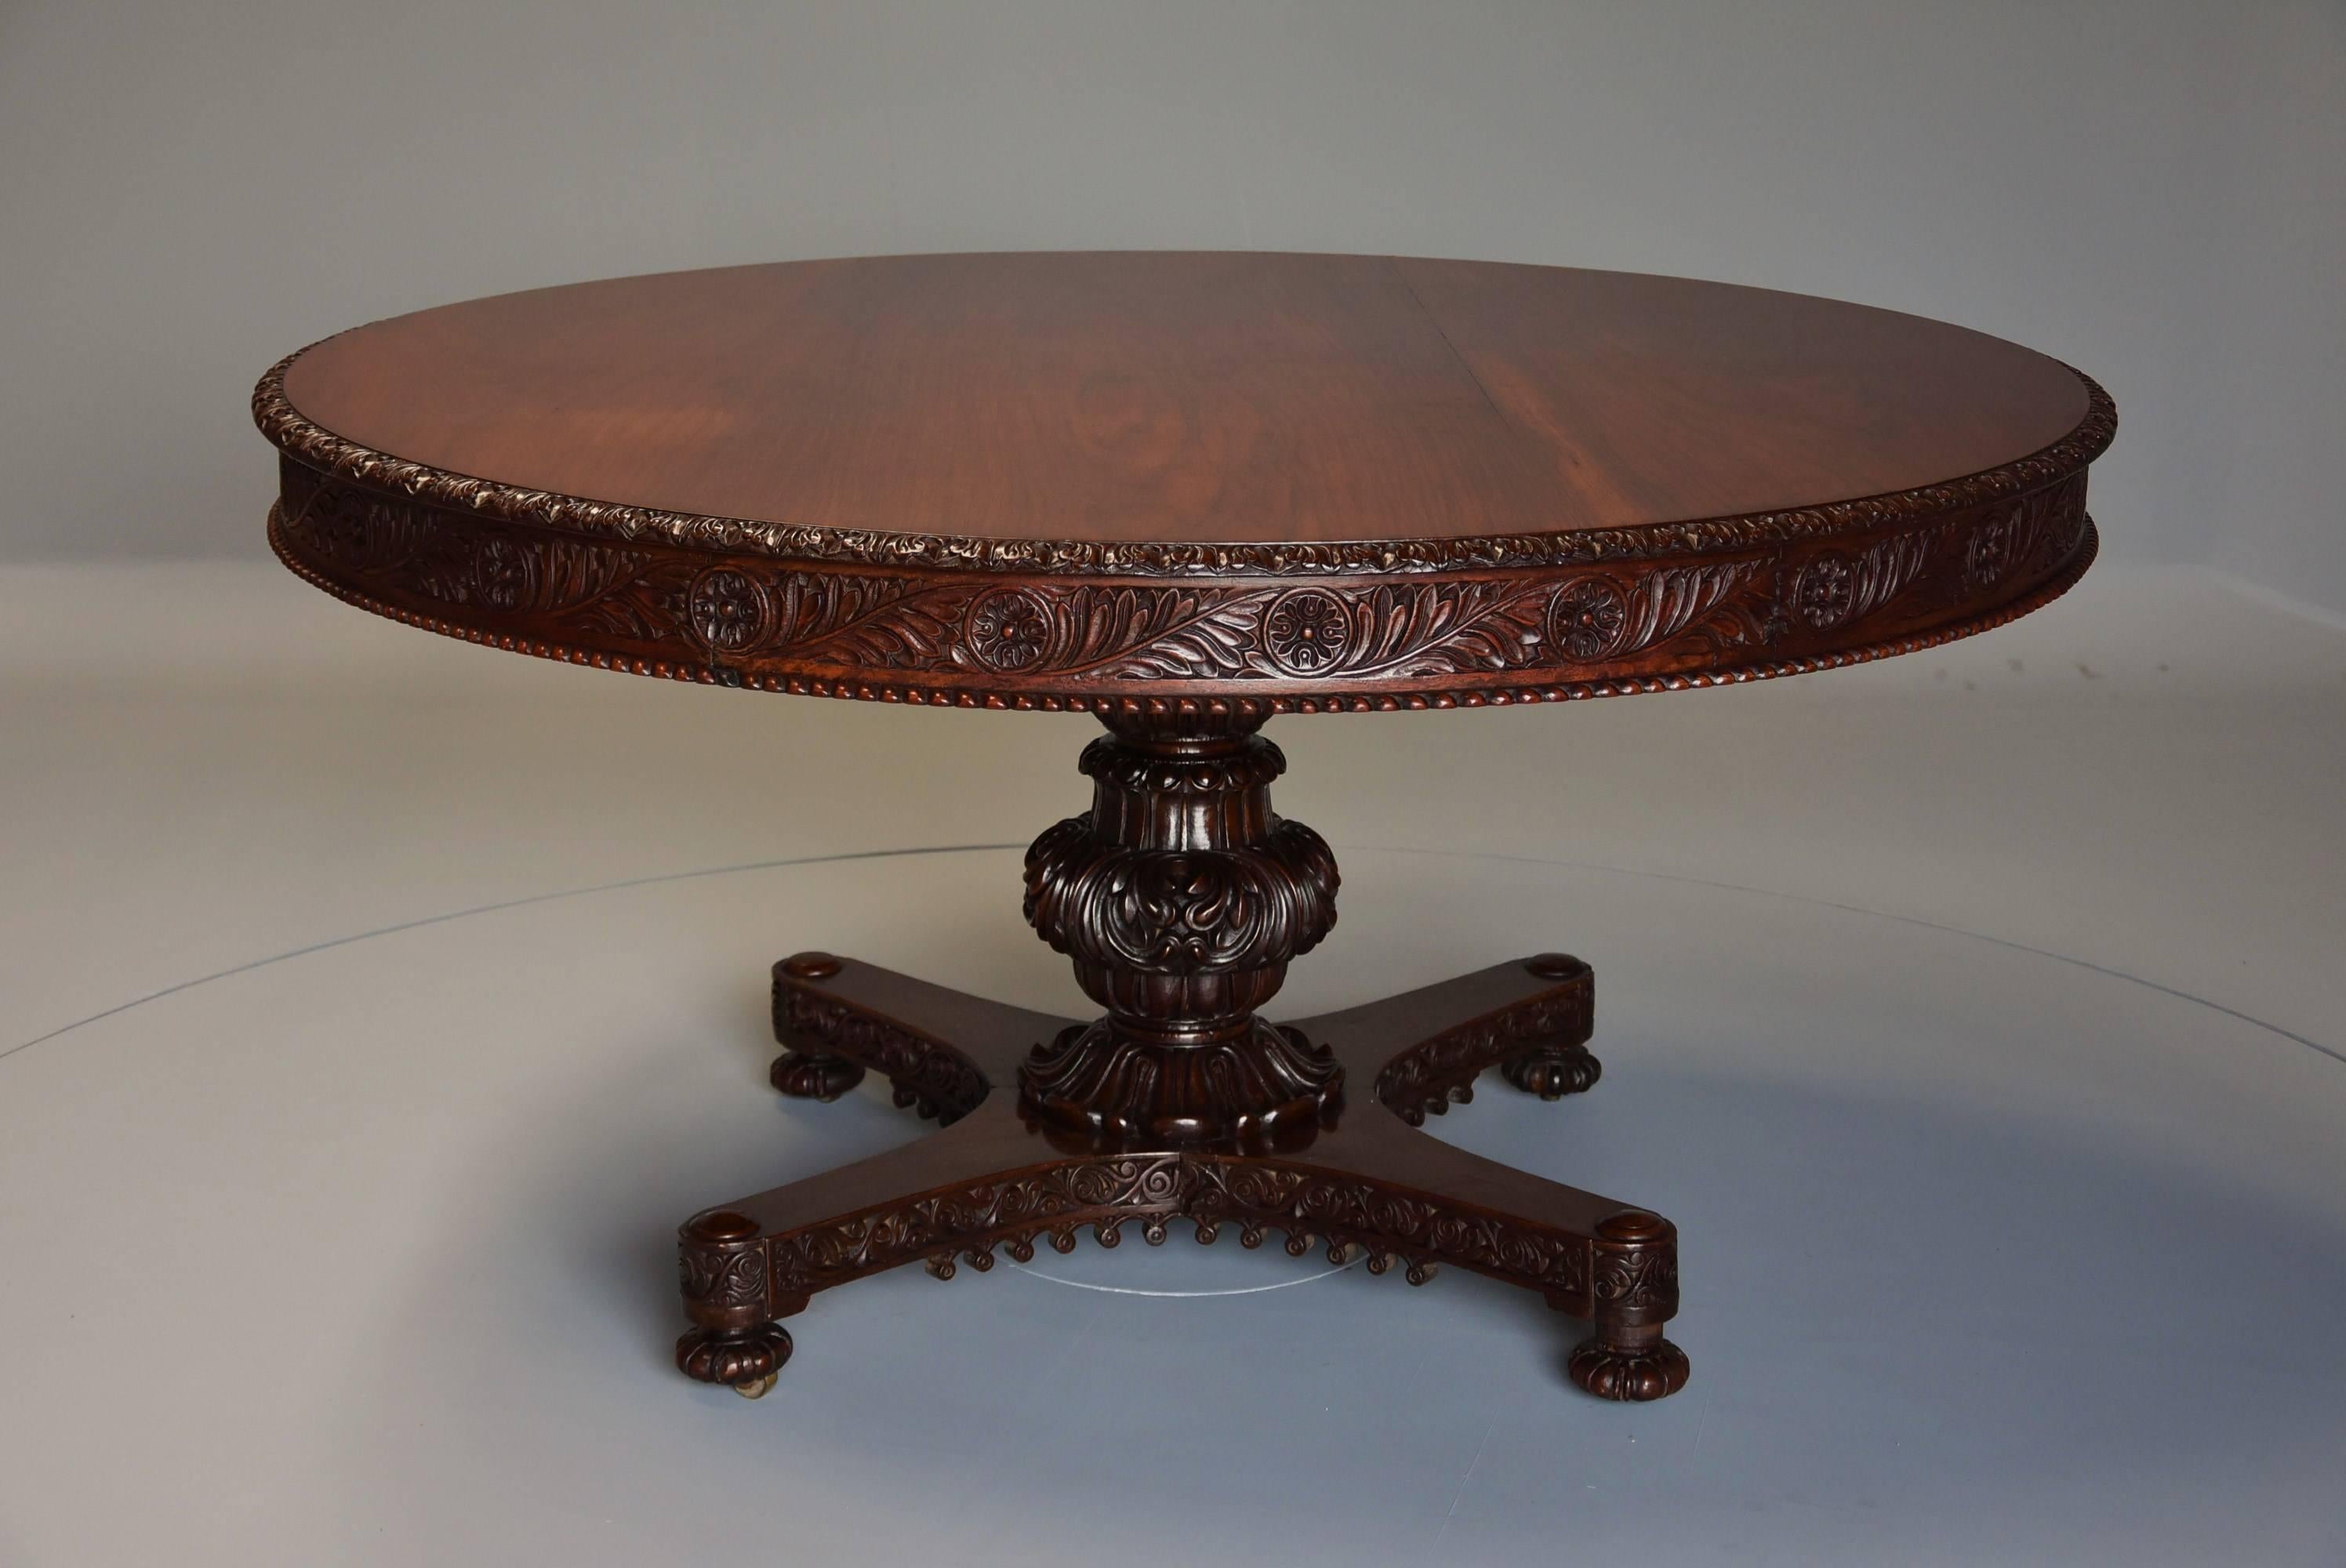 A large mid-19th century Anglo-Indian padouk superbly carved circular centre table.

This table consists of a solid circular padouk top with carved leaf edge leading down to a carved frieze with circular roundels and scrolling foliage with a